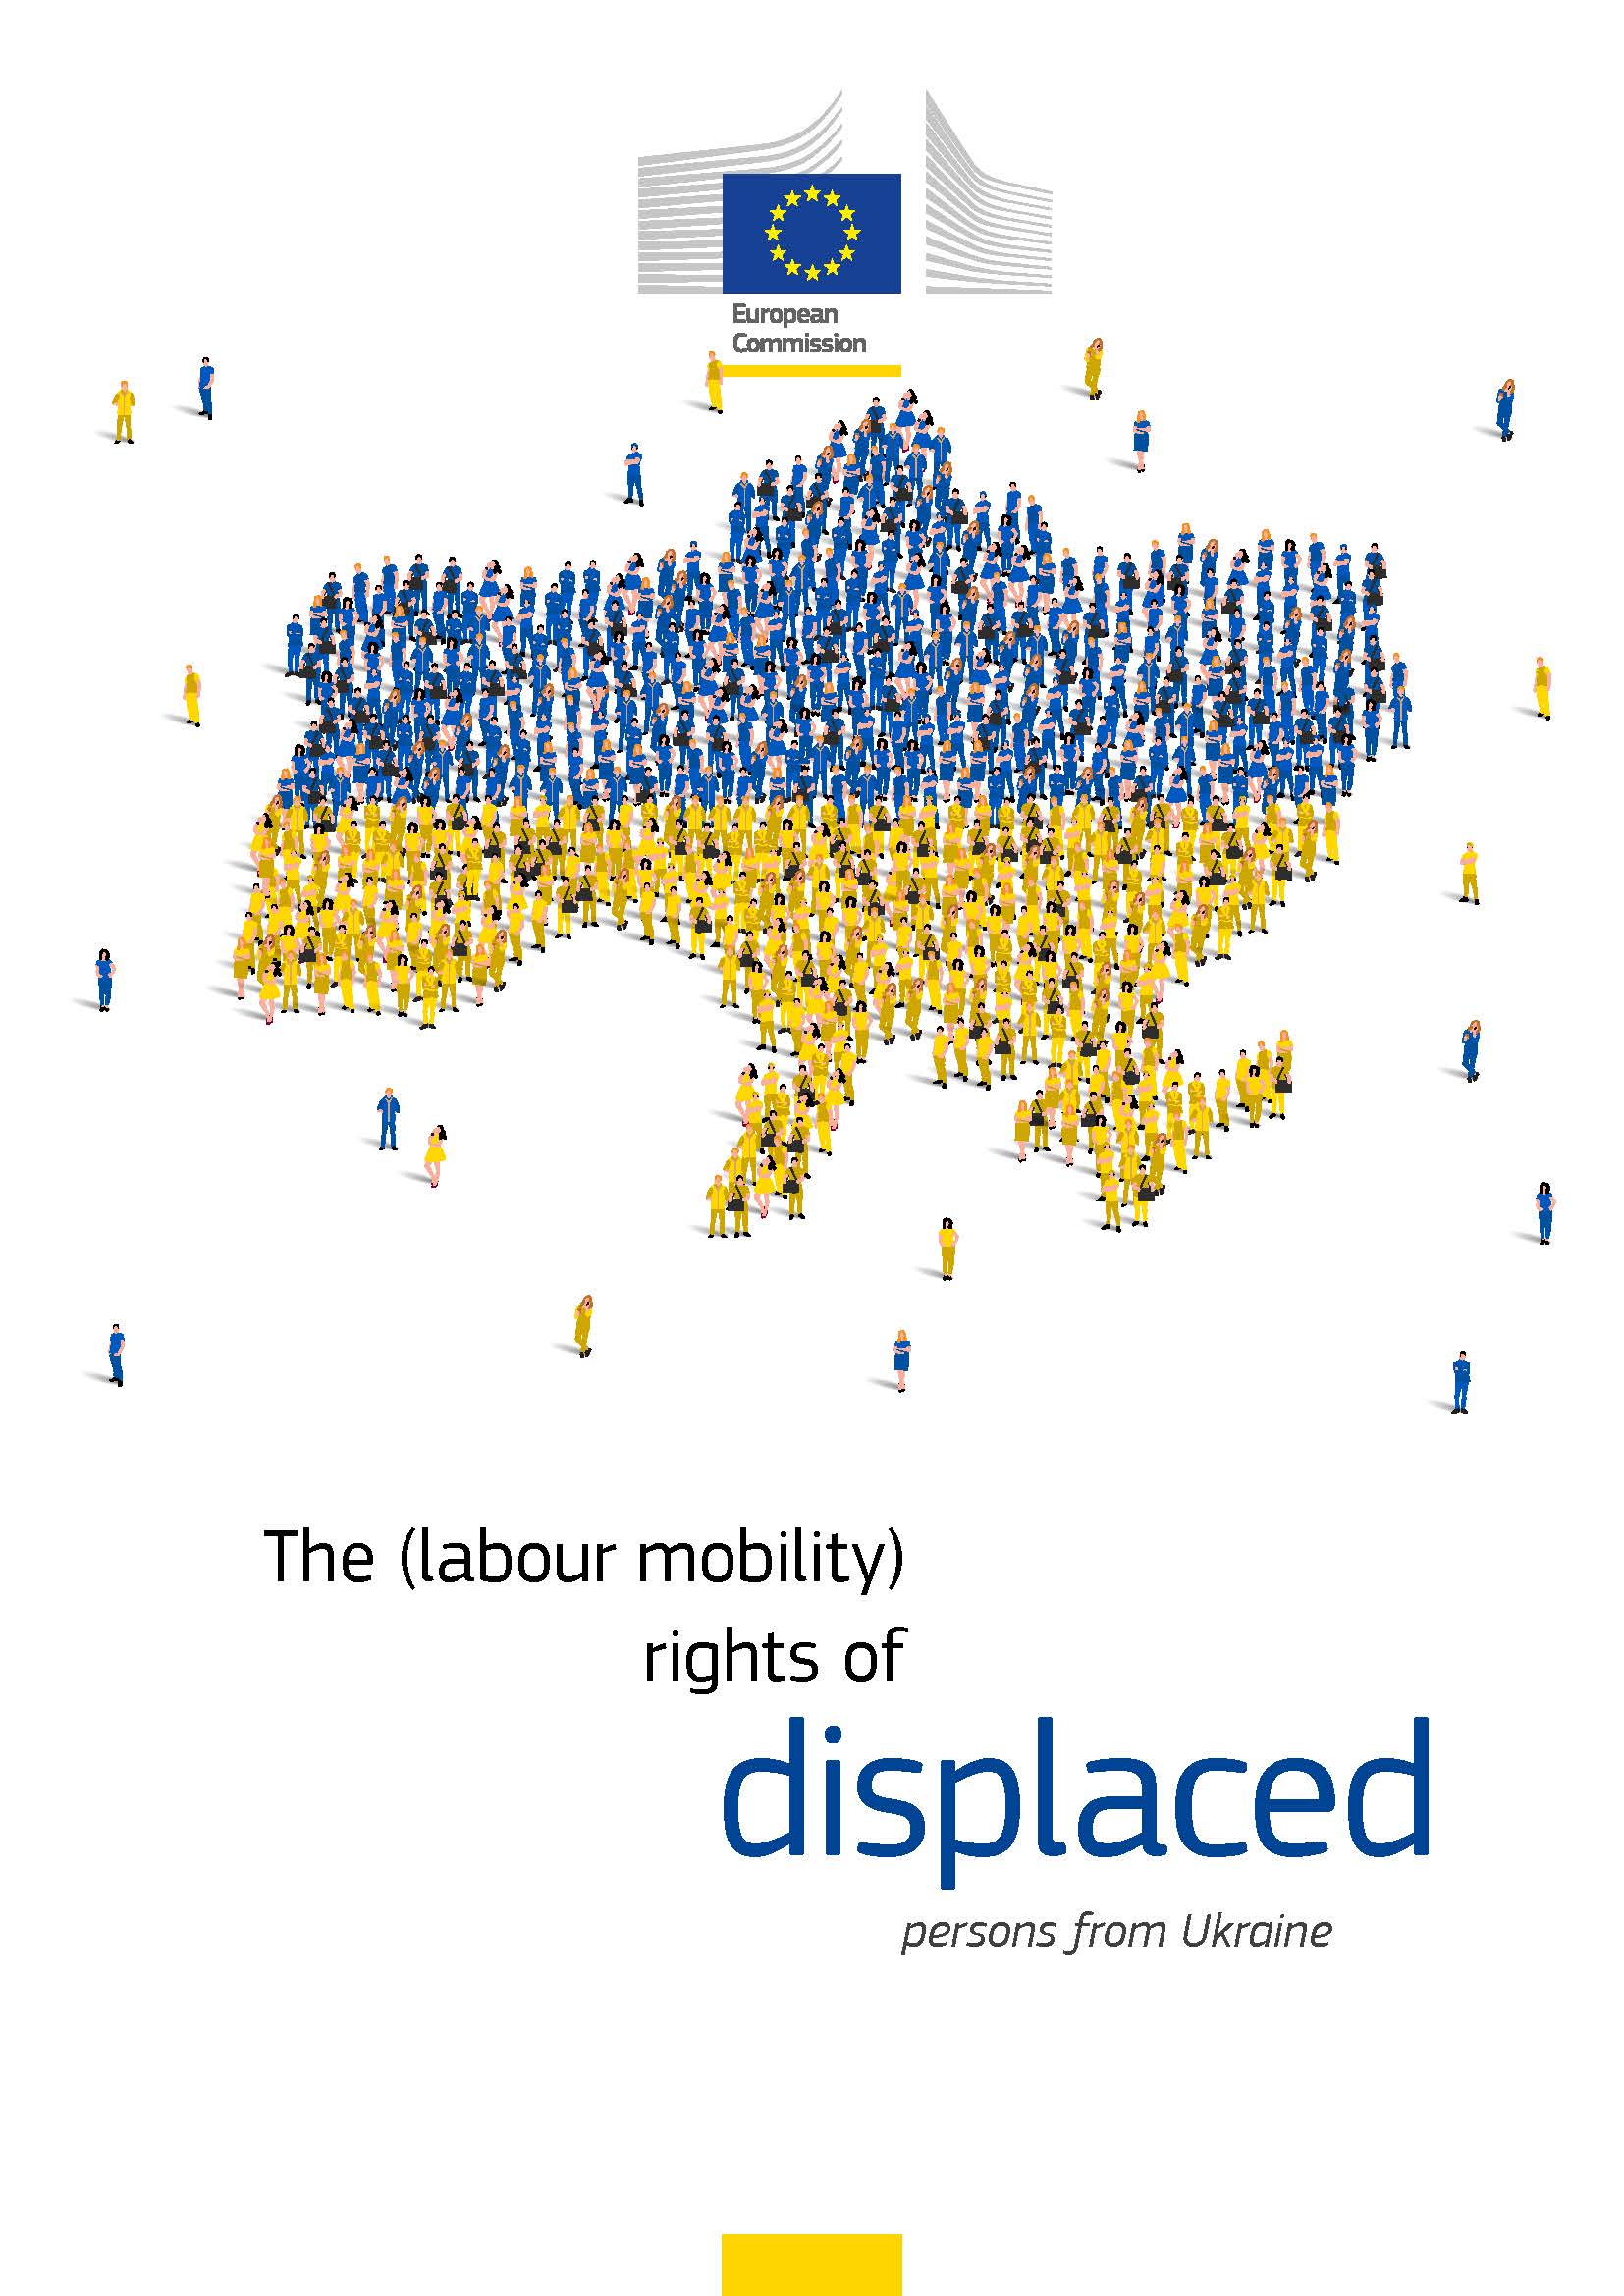 The (labour mobility) rights of displaced persons from Ukraine